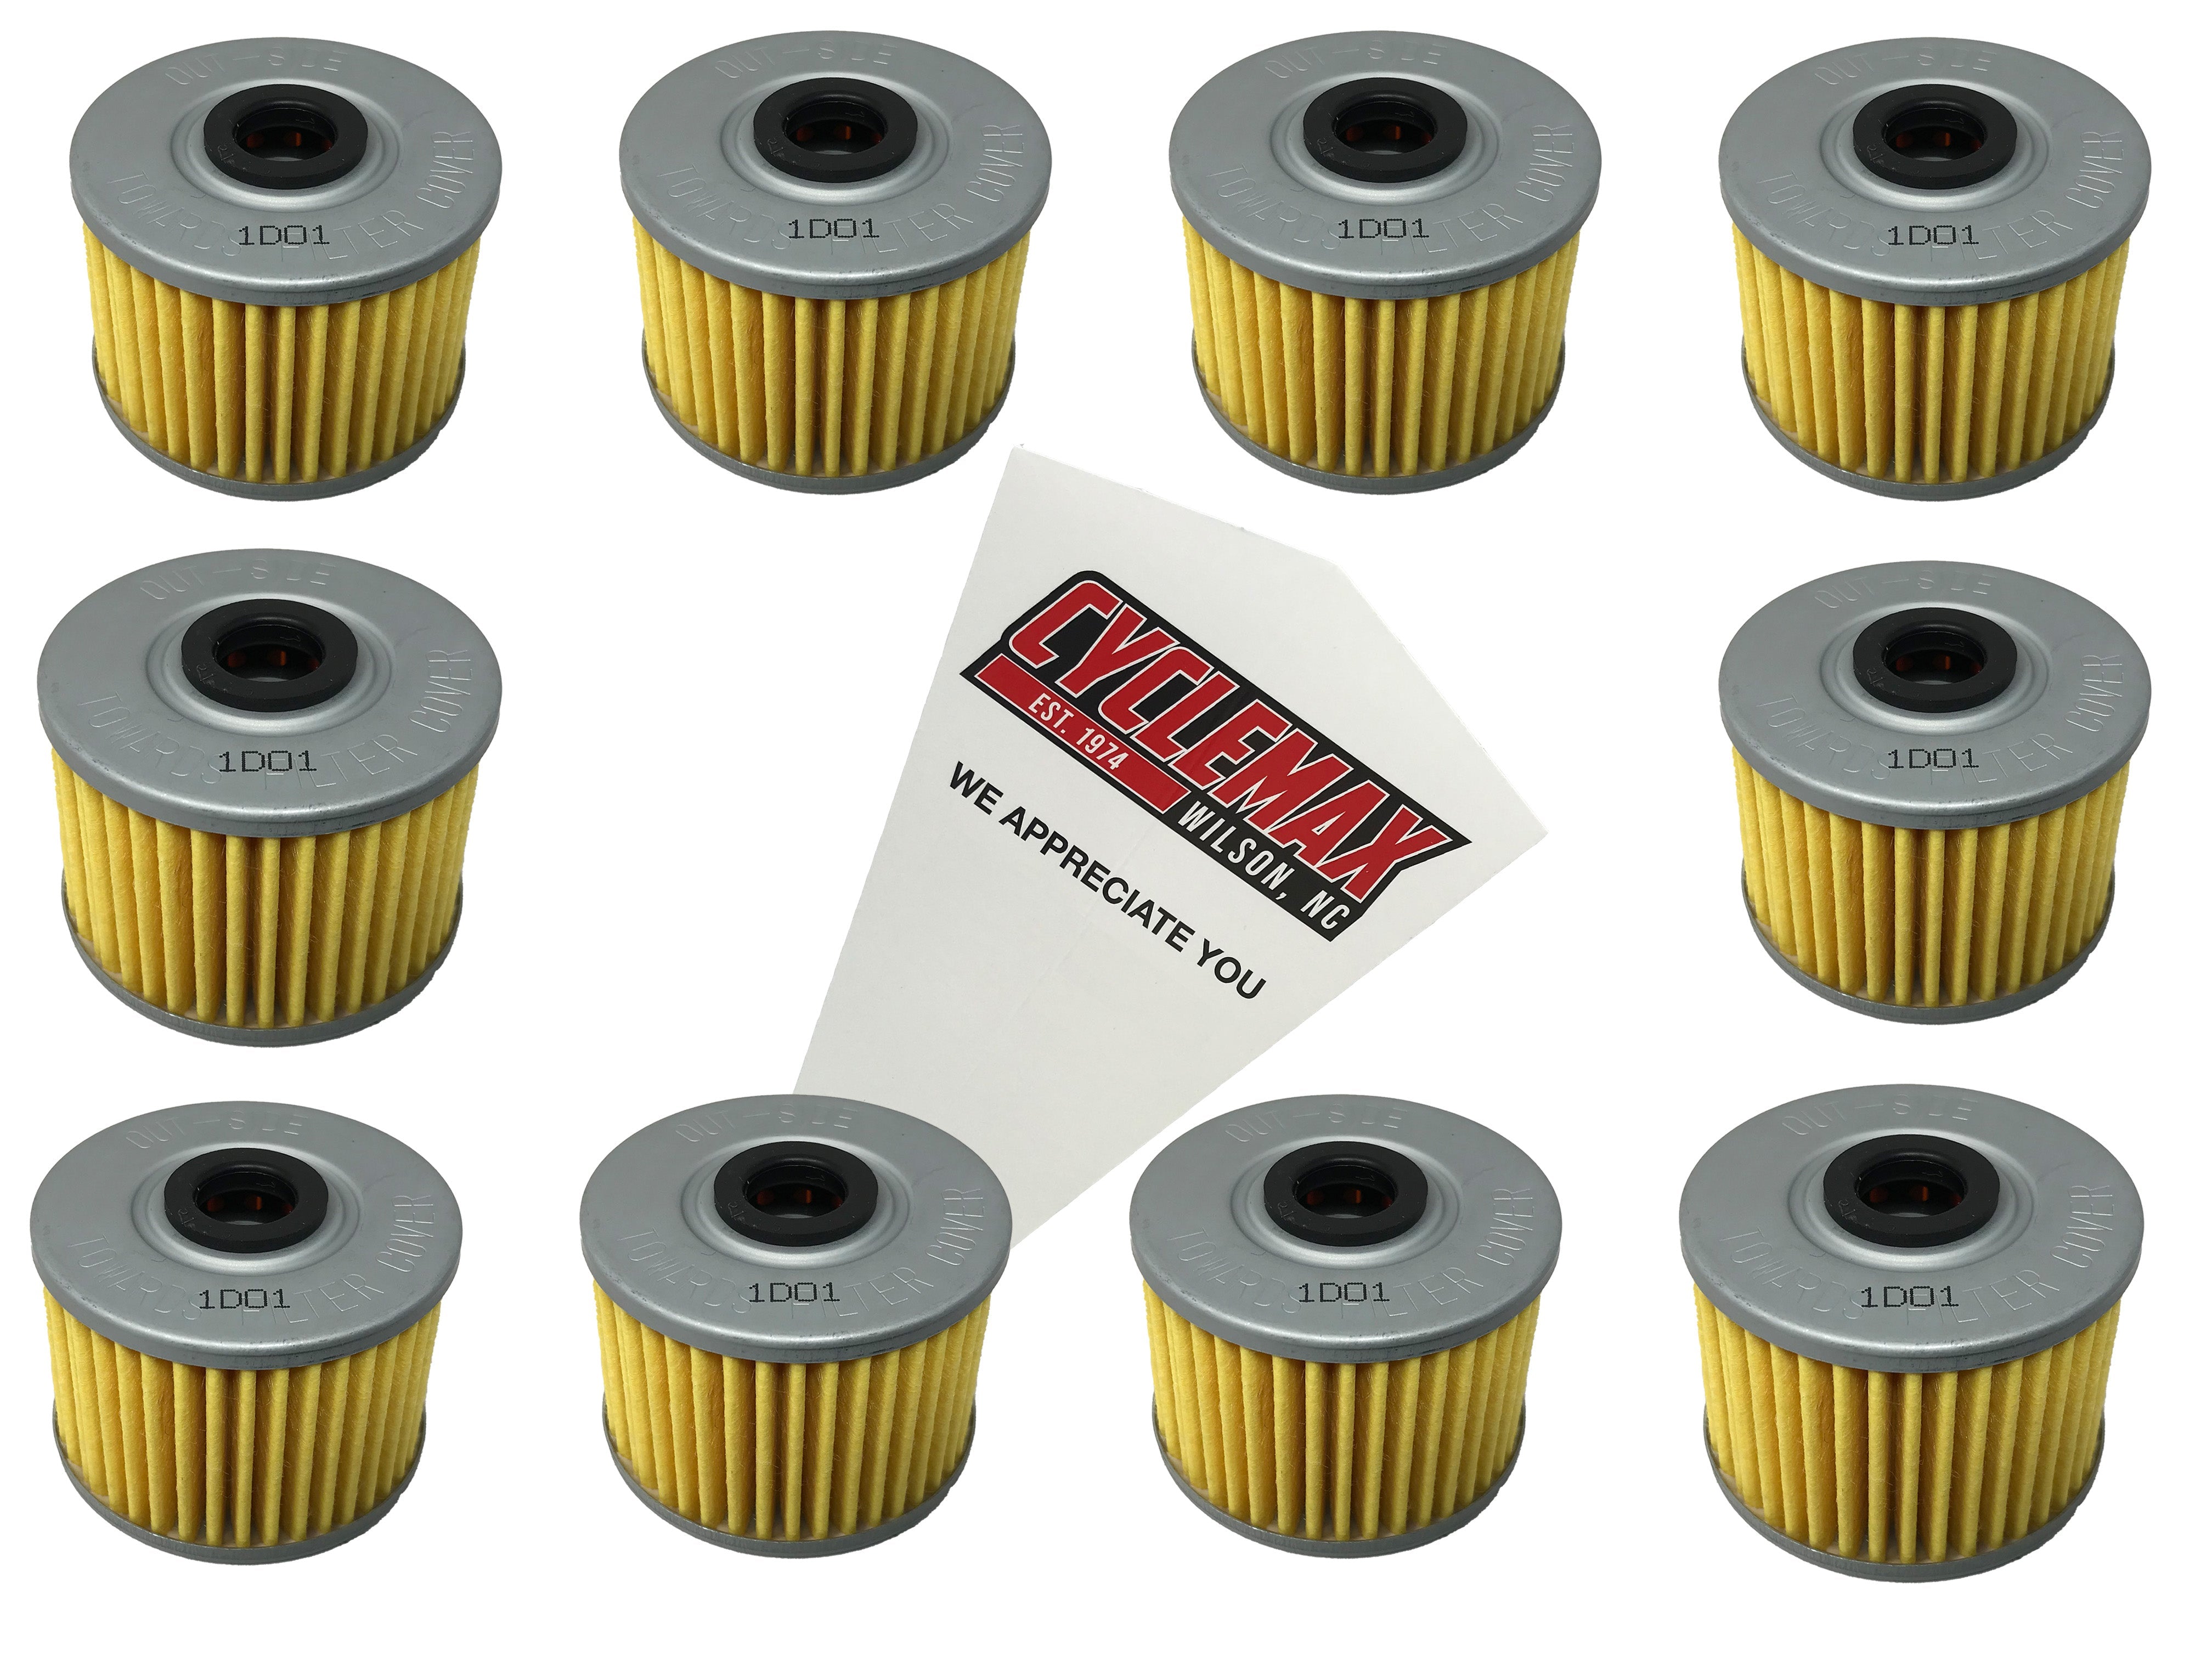 Cyclemax Ten Pack for Honda Oil Filter 15410-KF0-315 Contains Ten Filters and a Funnel